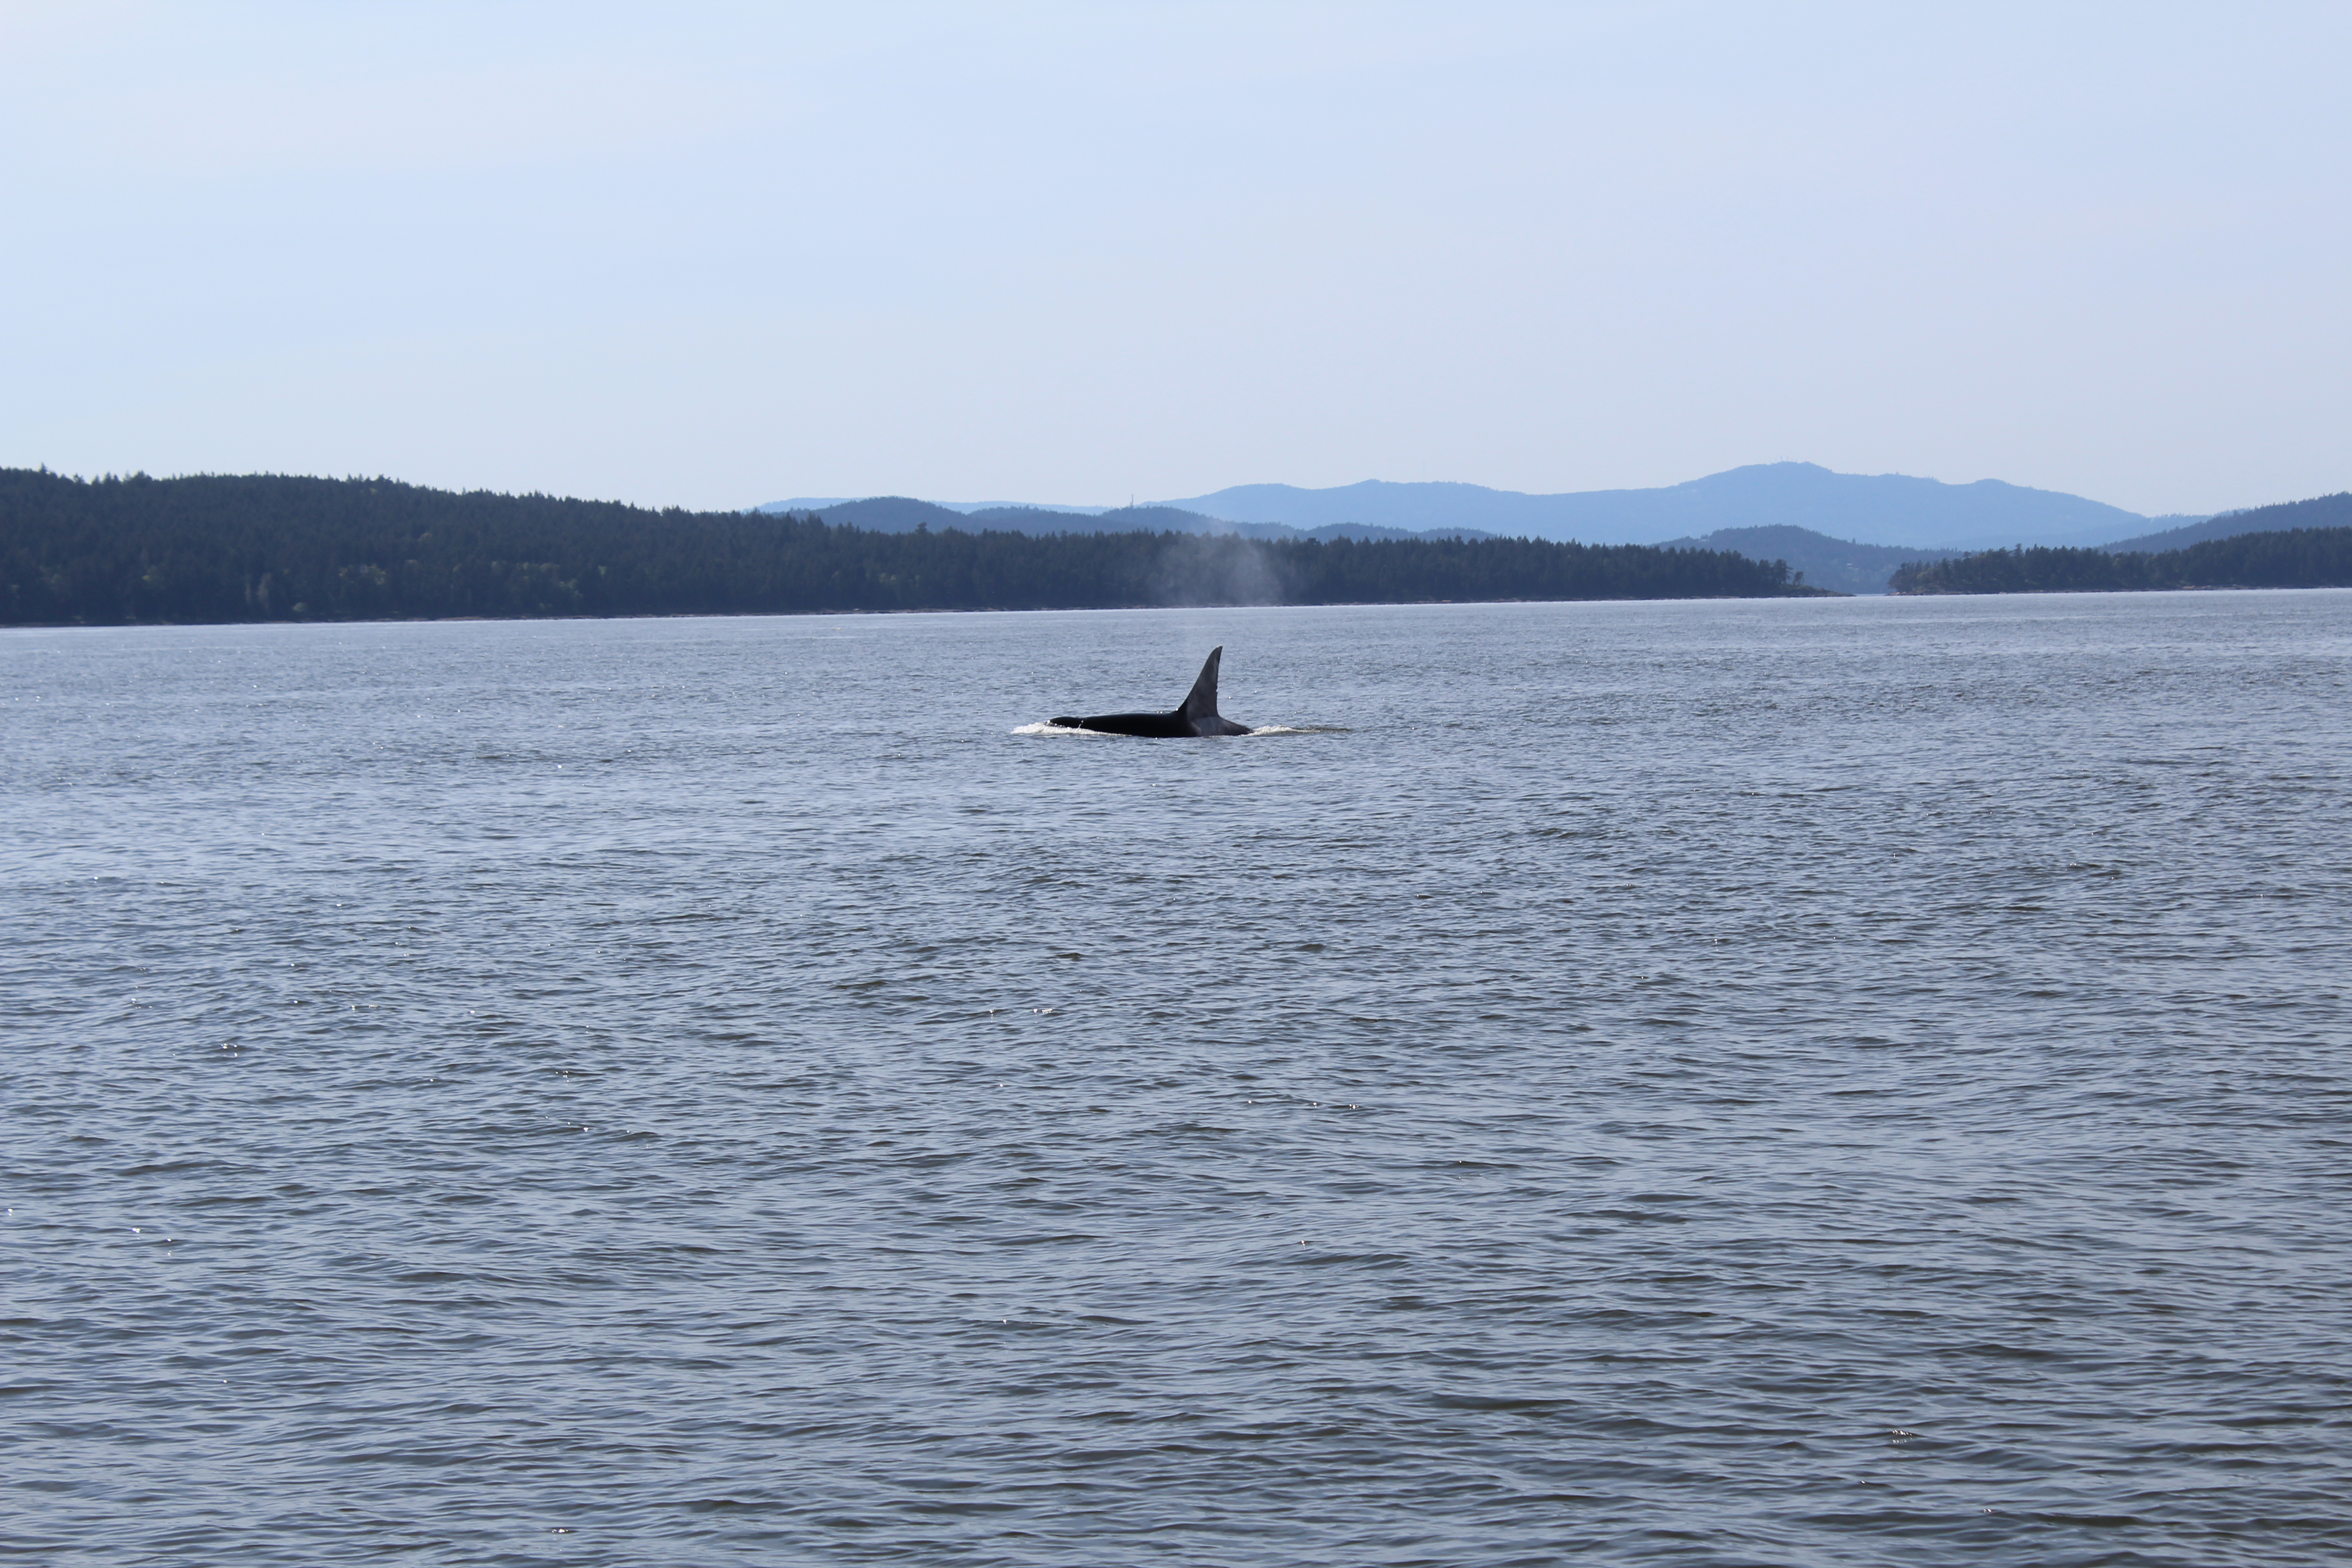 Transient Killer whale hunting alone